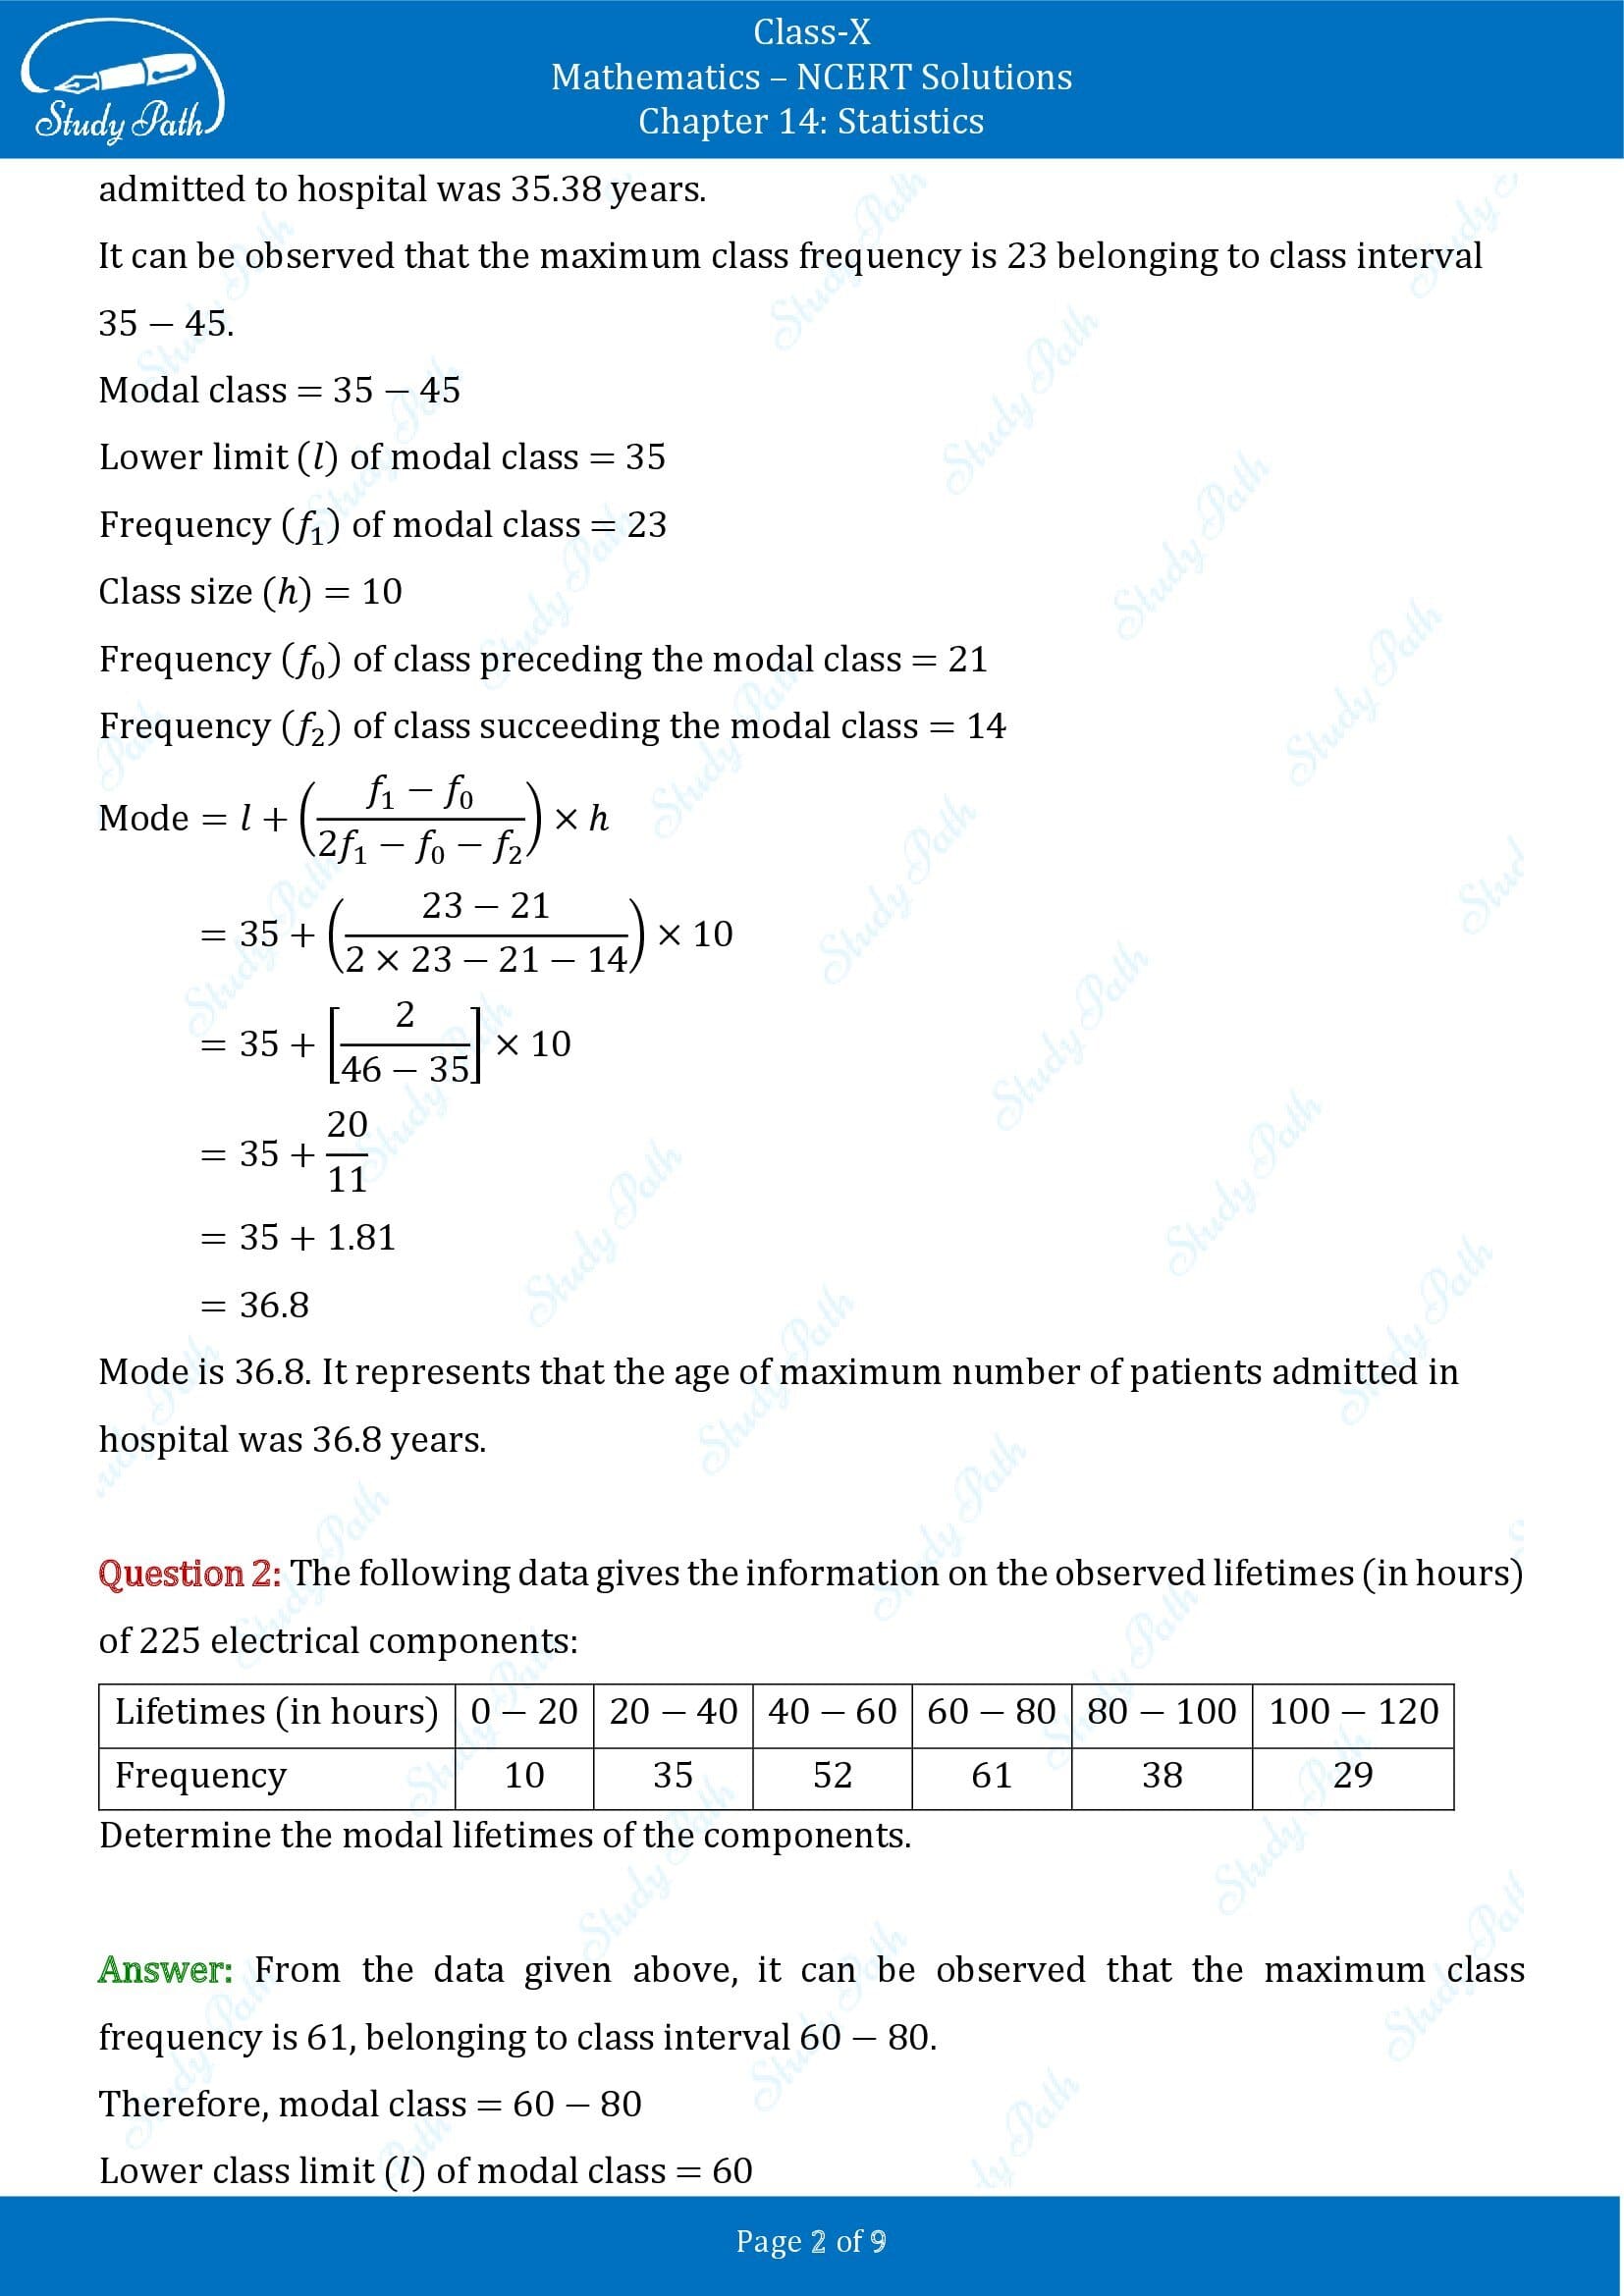 NCERT Solutions for Class 10 Maths Chapter 14 Statistics Exercise 14.2 00002